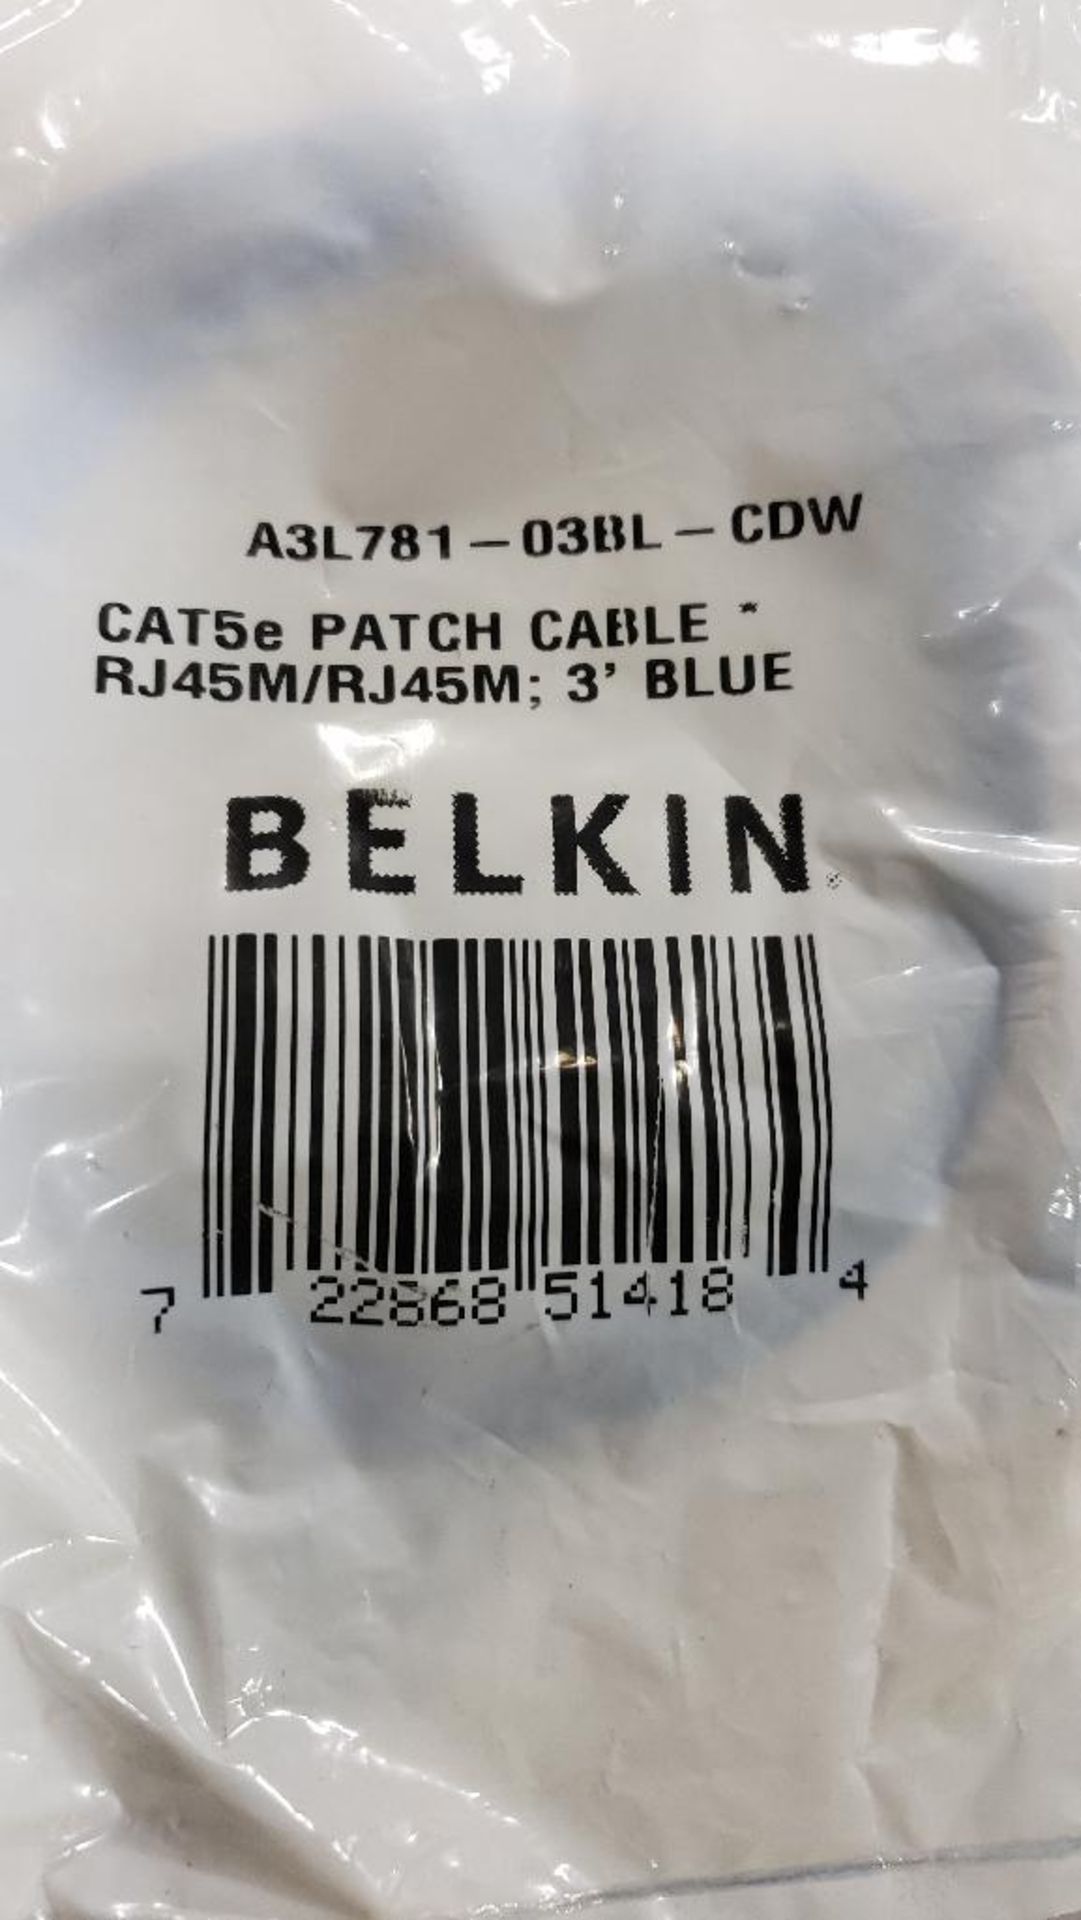 Qty 18 - Belkin patch cable. Part number A3L781-038L-CDW. New in package. - Image 2 of 3